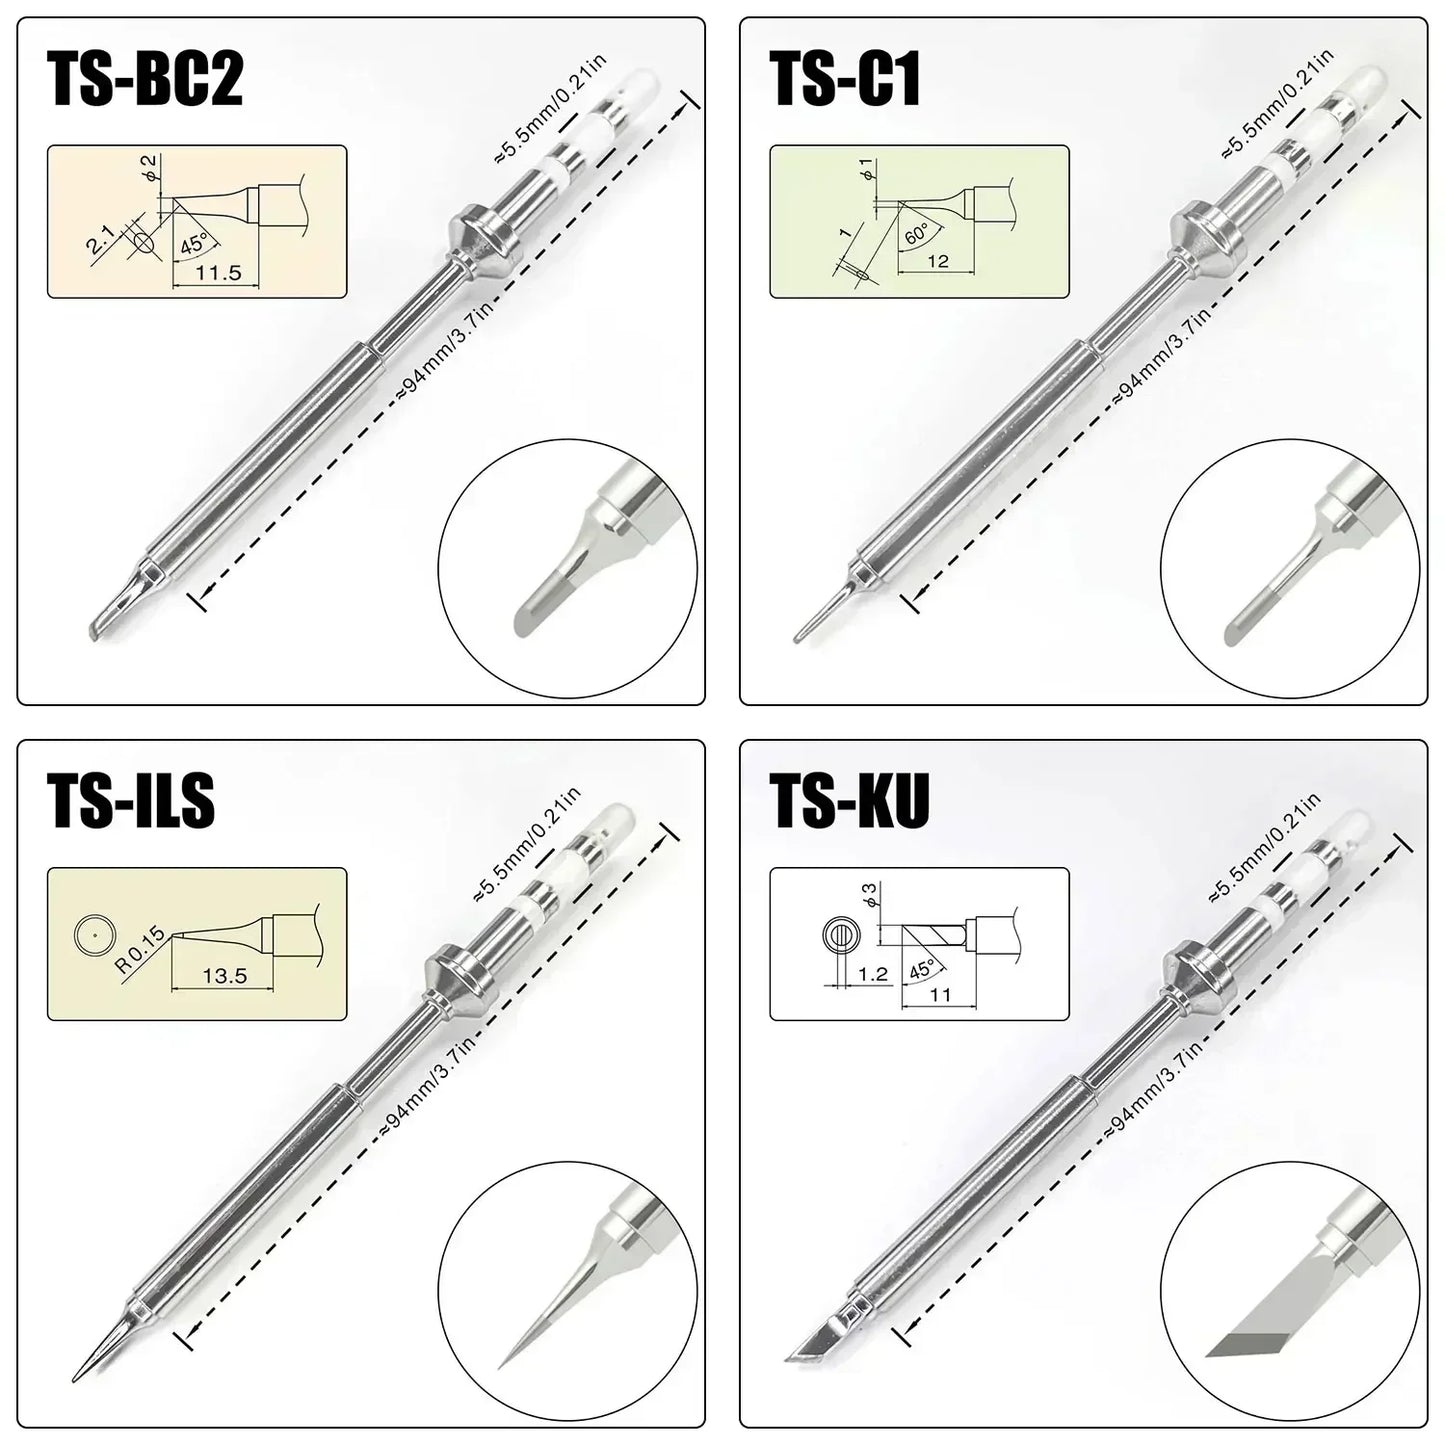 Pine64 TS100 TS101 Soldering Iron Tips Replacement Various Models of Pinecil Electric Soldering Iron Tip TS Series BC2 ILS C4 KU